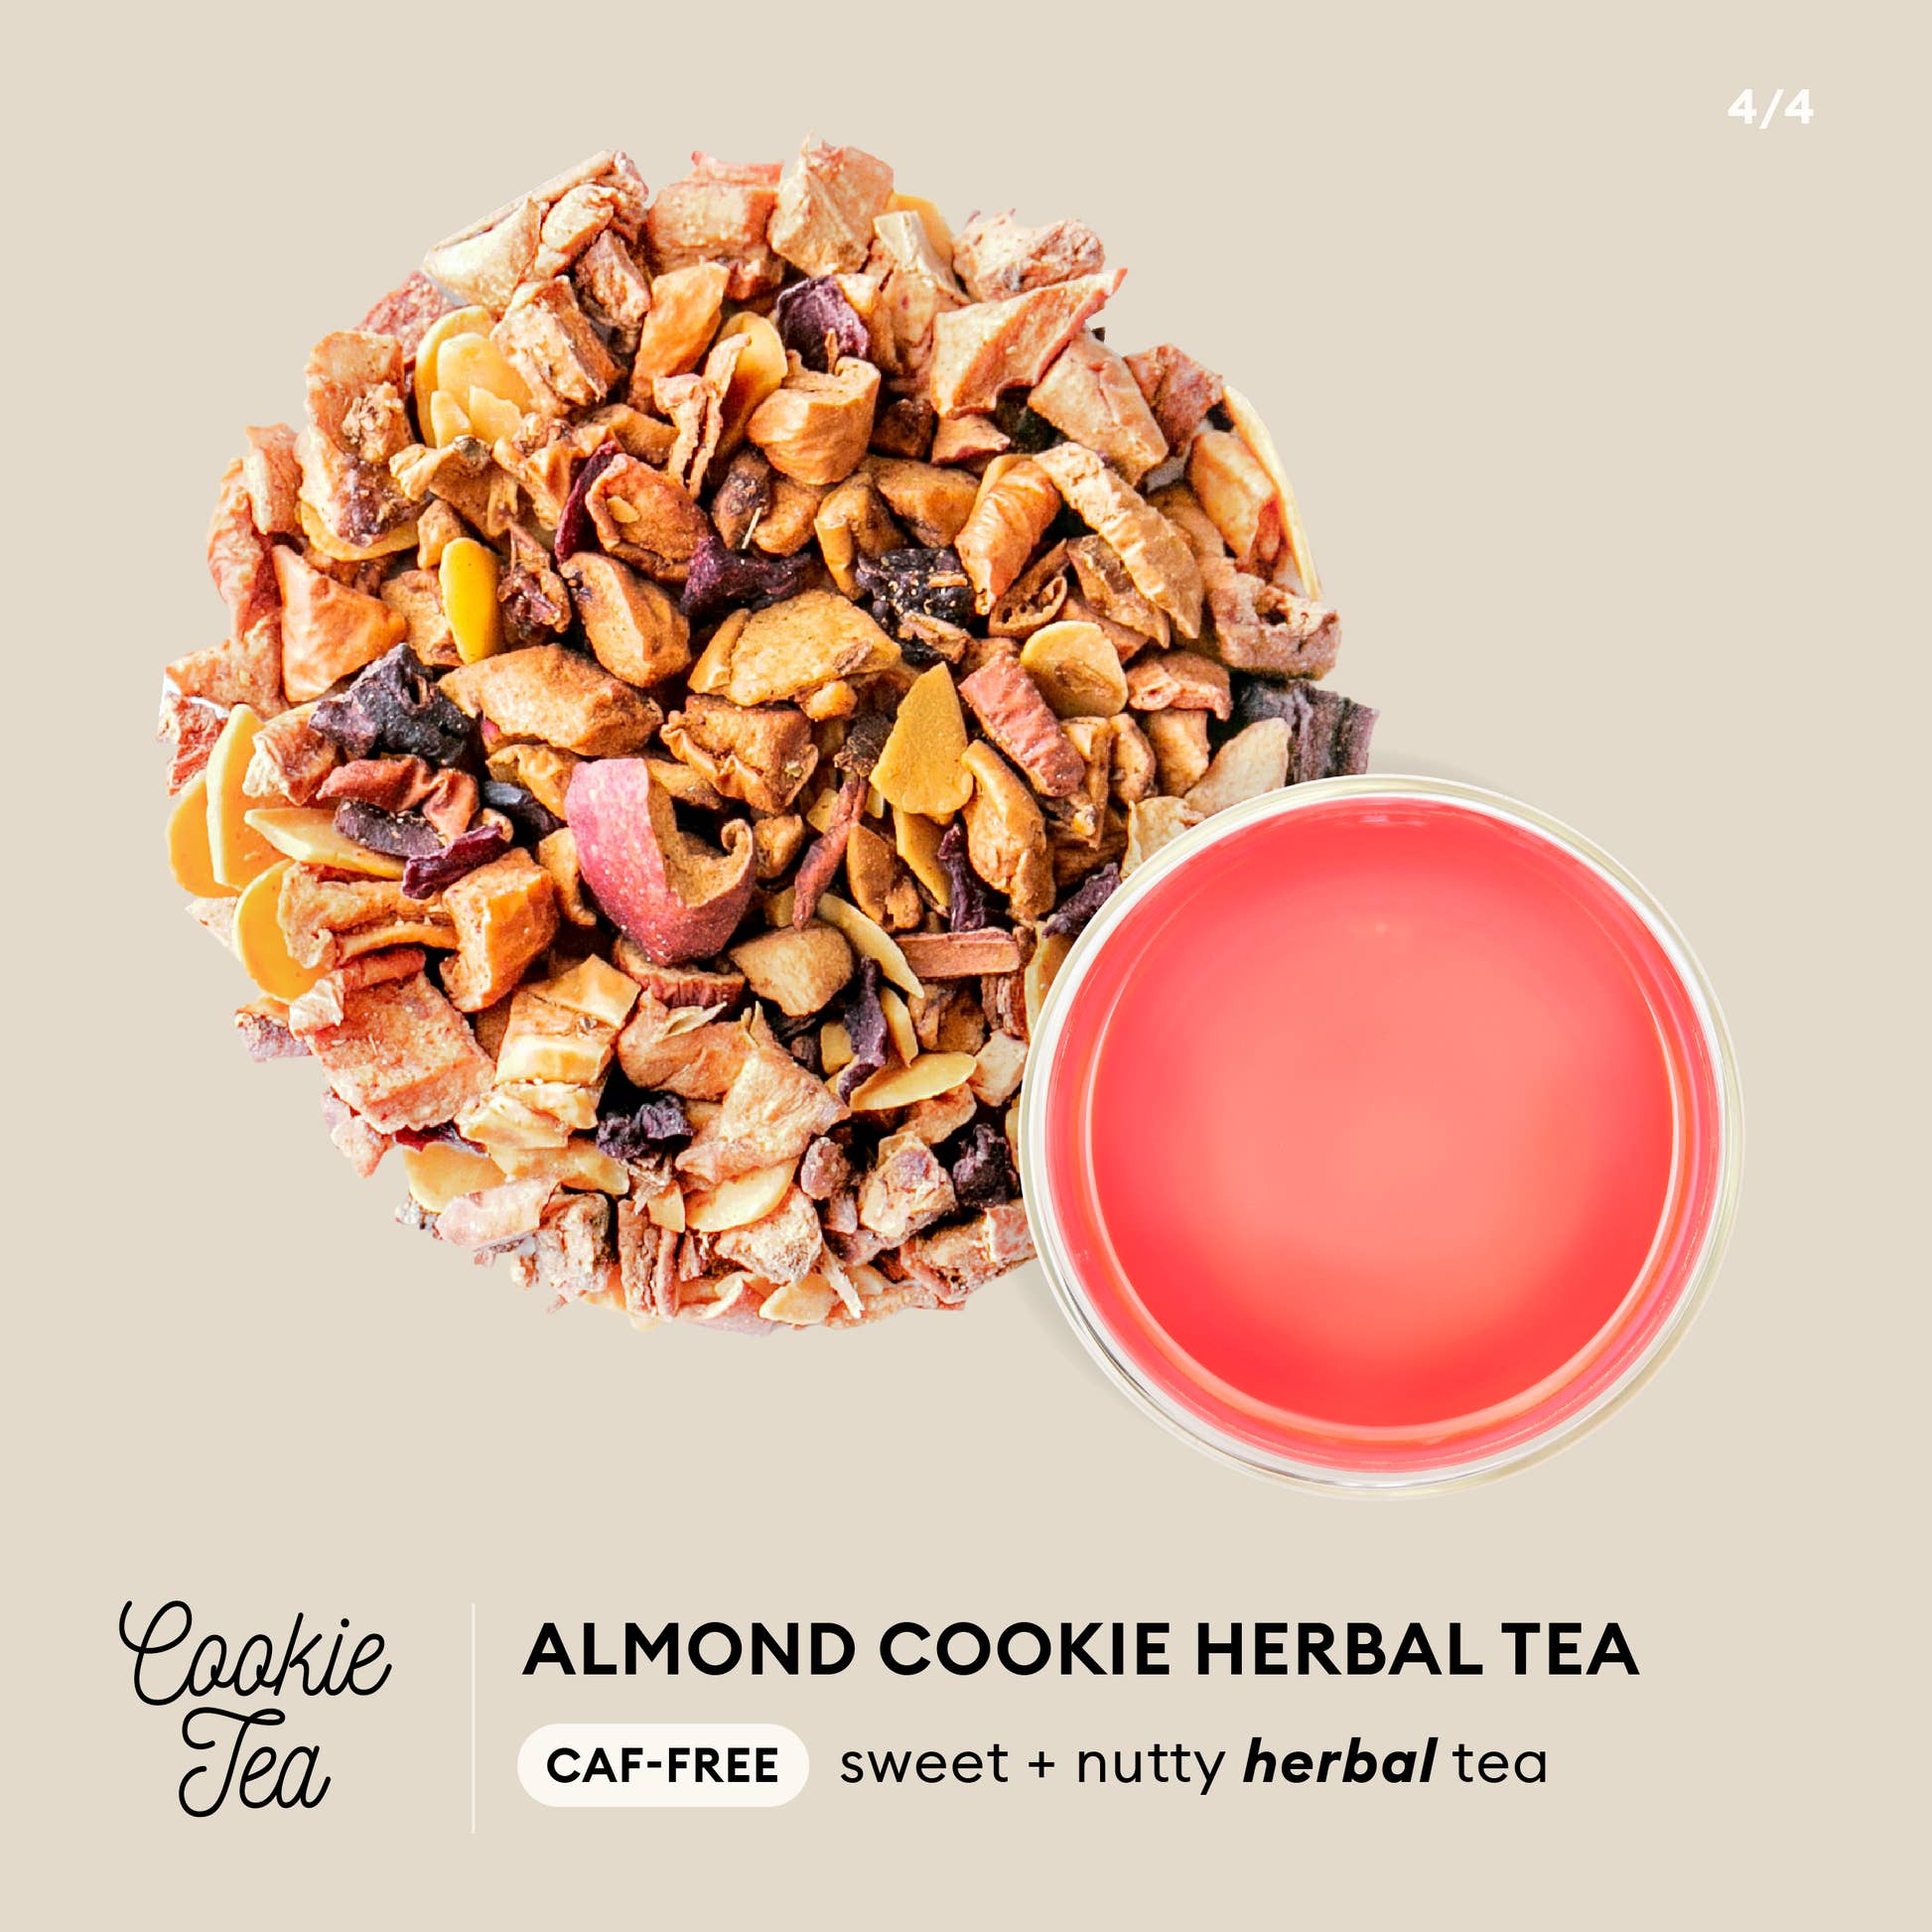 Discover new teas for free